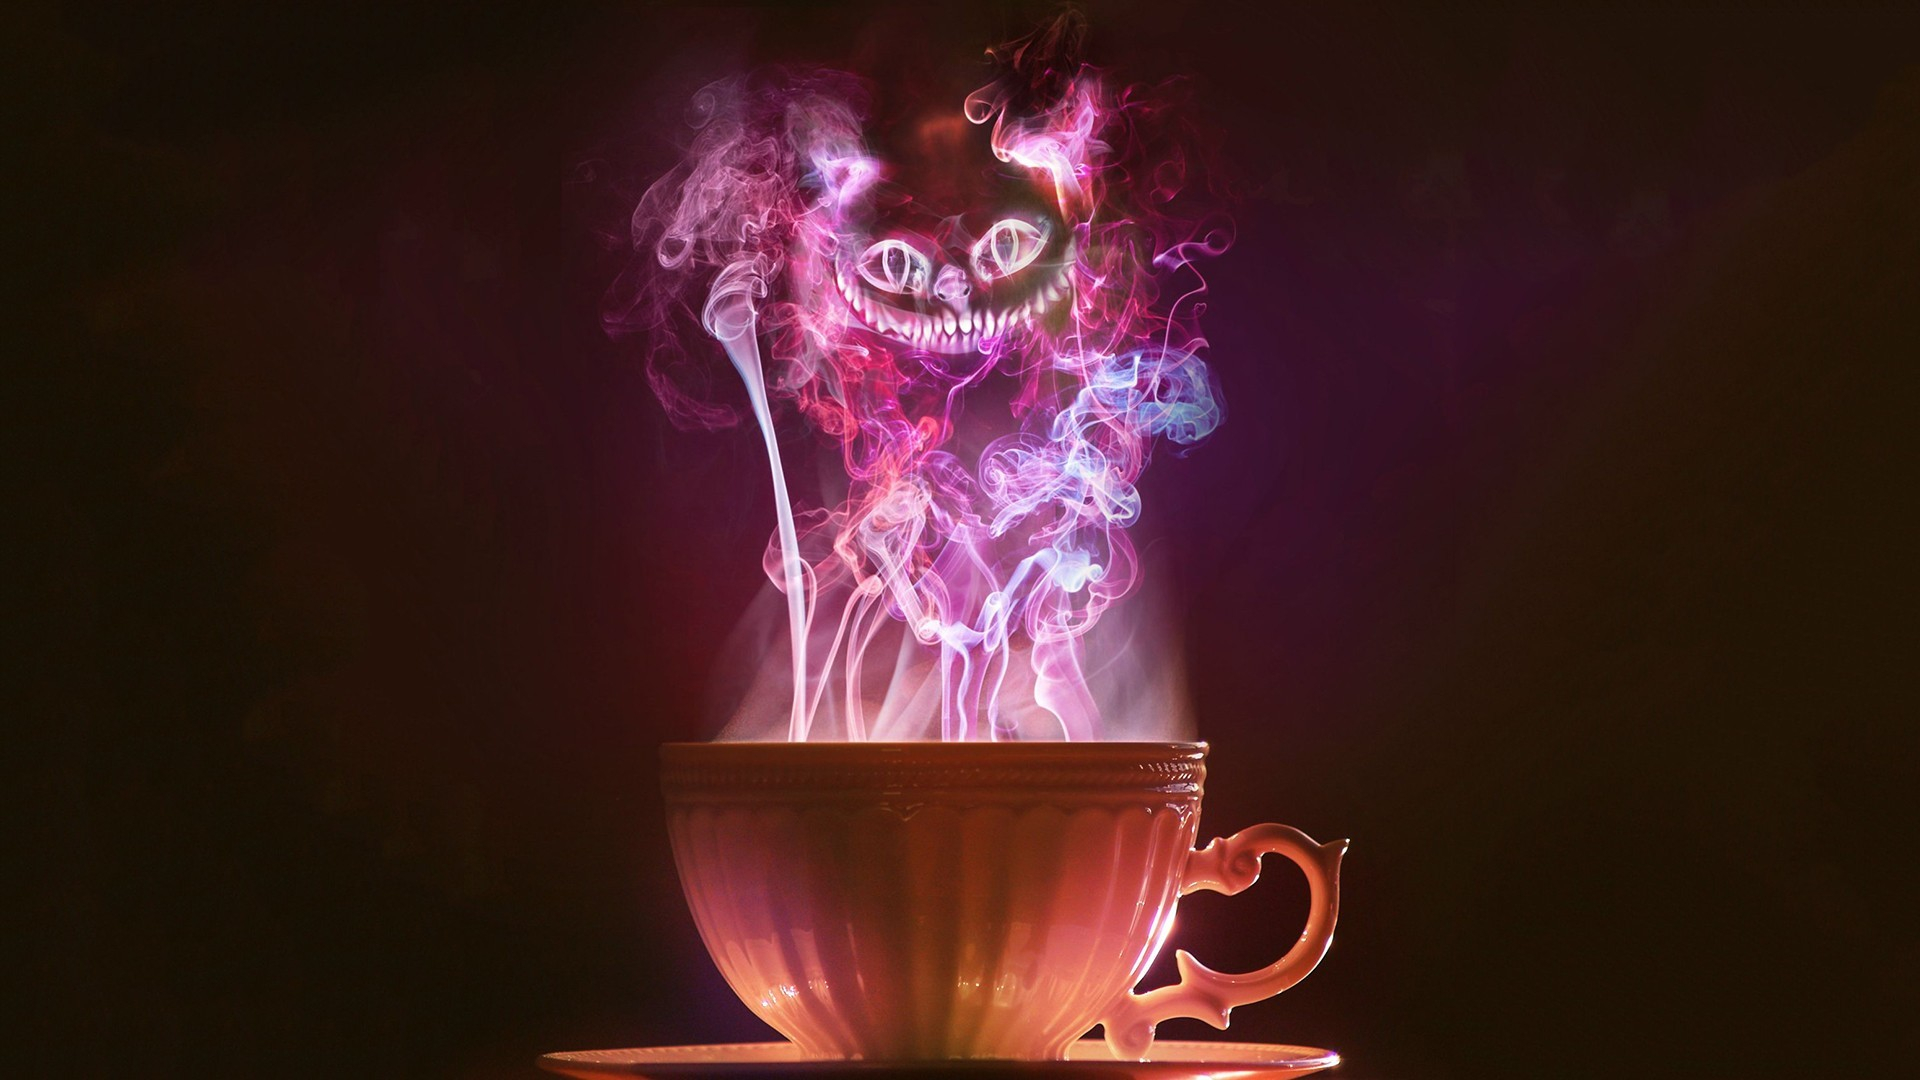 1920x1080 Wallpaper : illustration, fantasy art, night, Cheshire Cat, smoke, cup, Alice in Wonderland, light, color, lighting, flame, darkness Aliced1 247458 HD Wallpapers